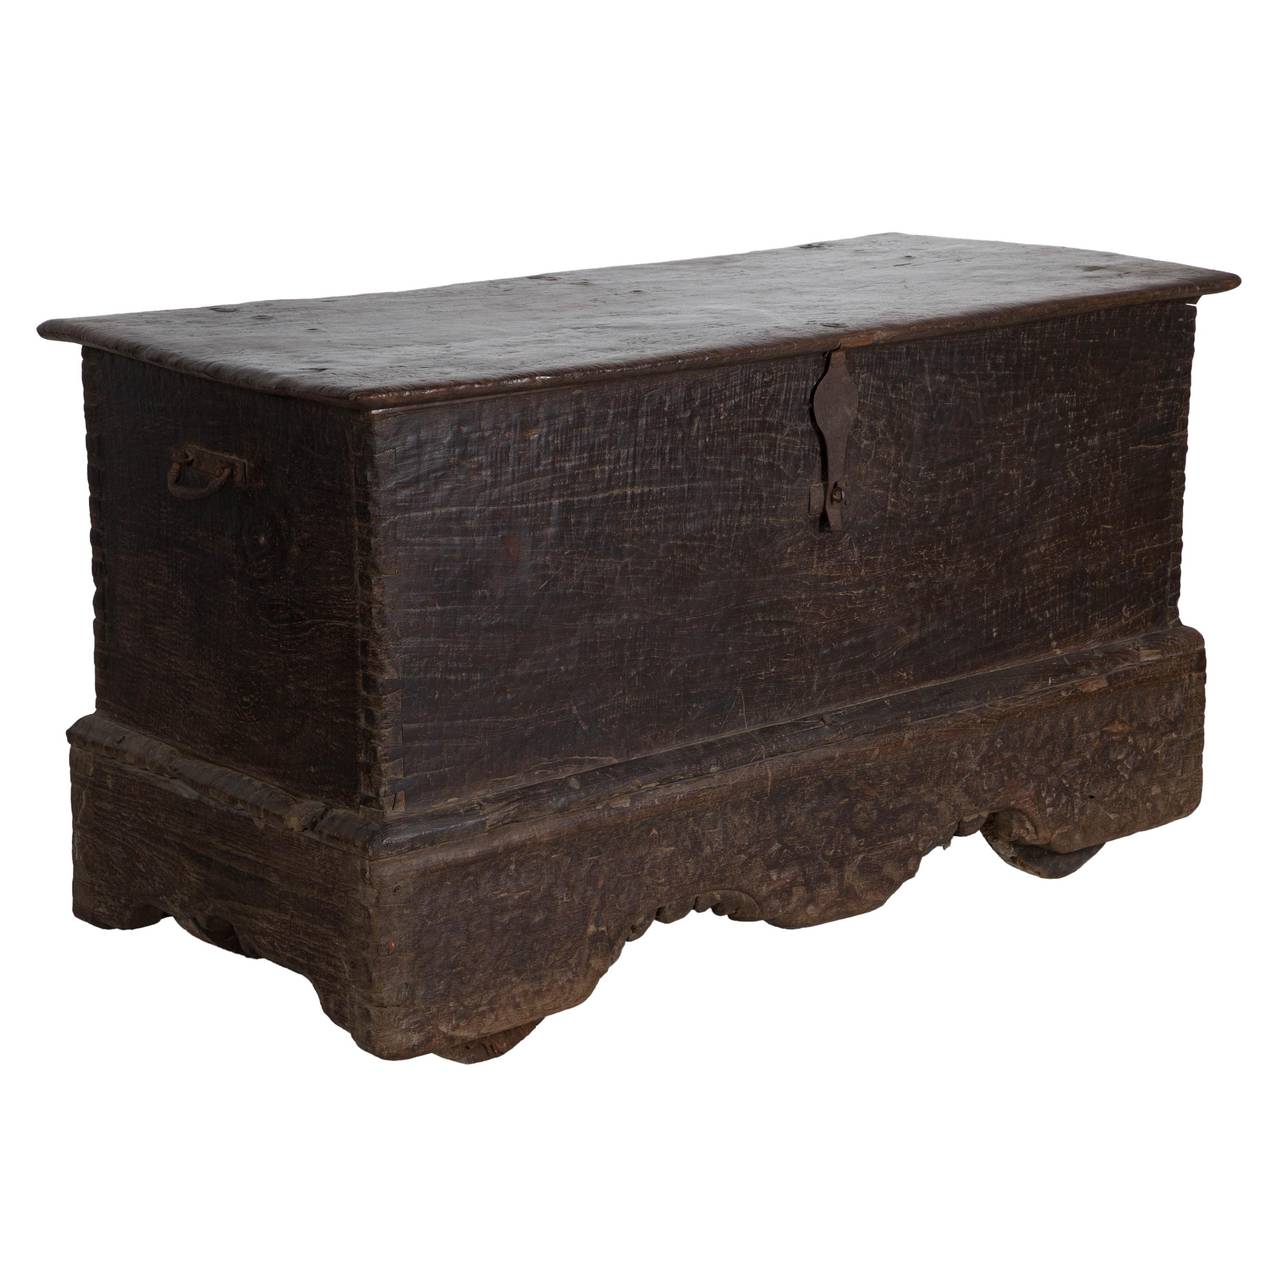 An impressive, large Sumatran coffer / chest with handles to either end and raised on four wooden wheels. Very naïve, rustic and heavy – probably made in a village, and very different from the usual ‘marriage chests’ found around Indonesia.  Late